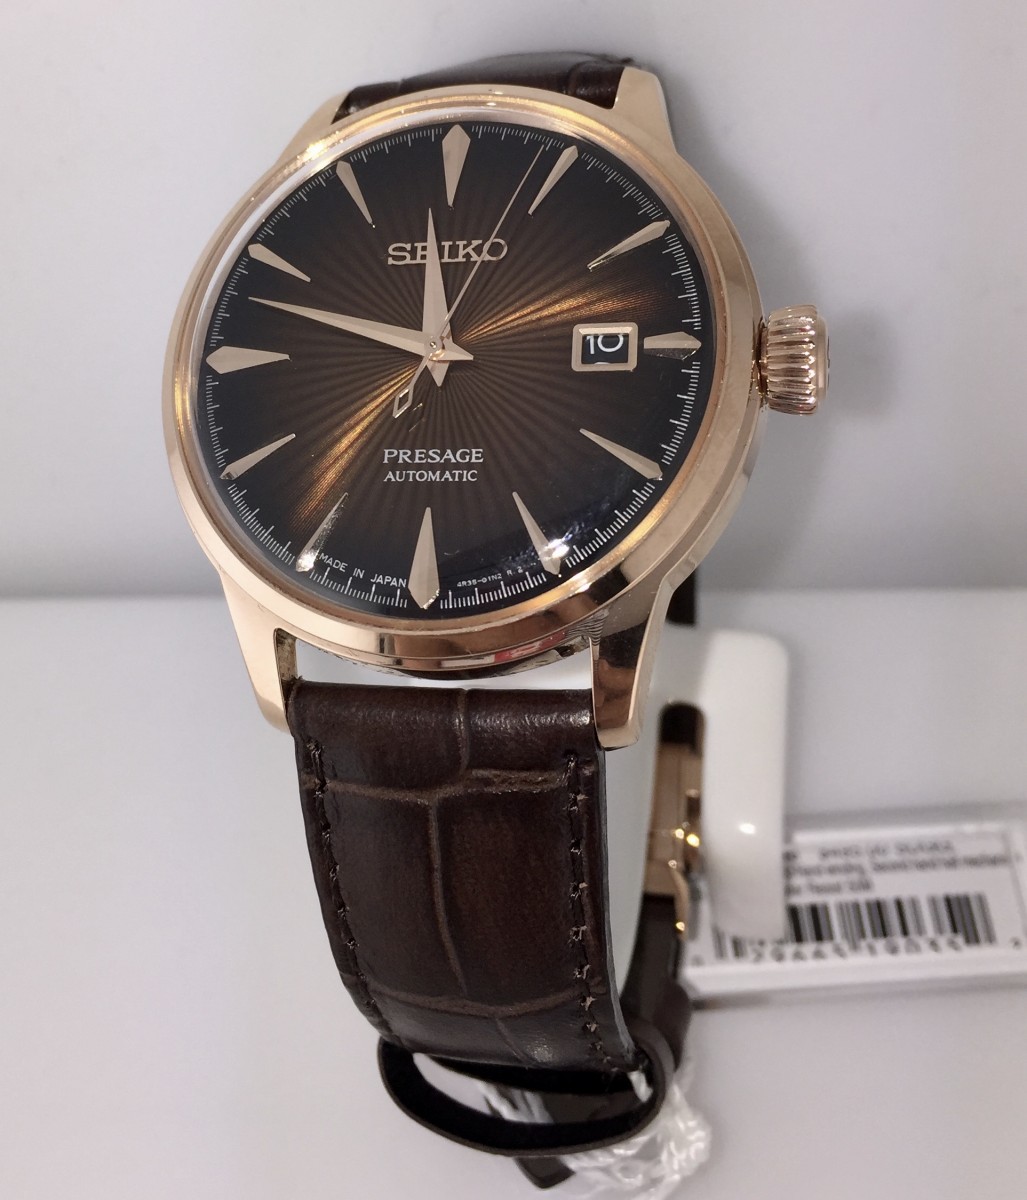 Seiko Men's Automatic Presage Brown Leather Strap Watch Reviews All Watches  Jewelry Watches Macy's 